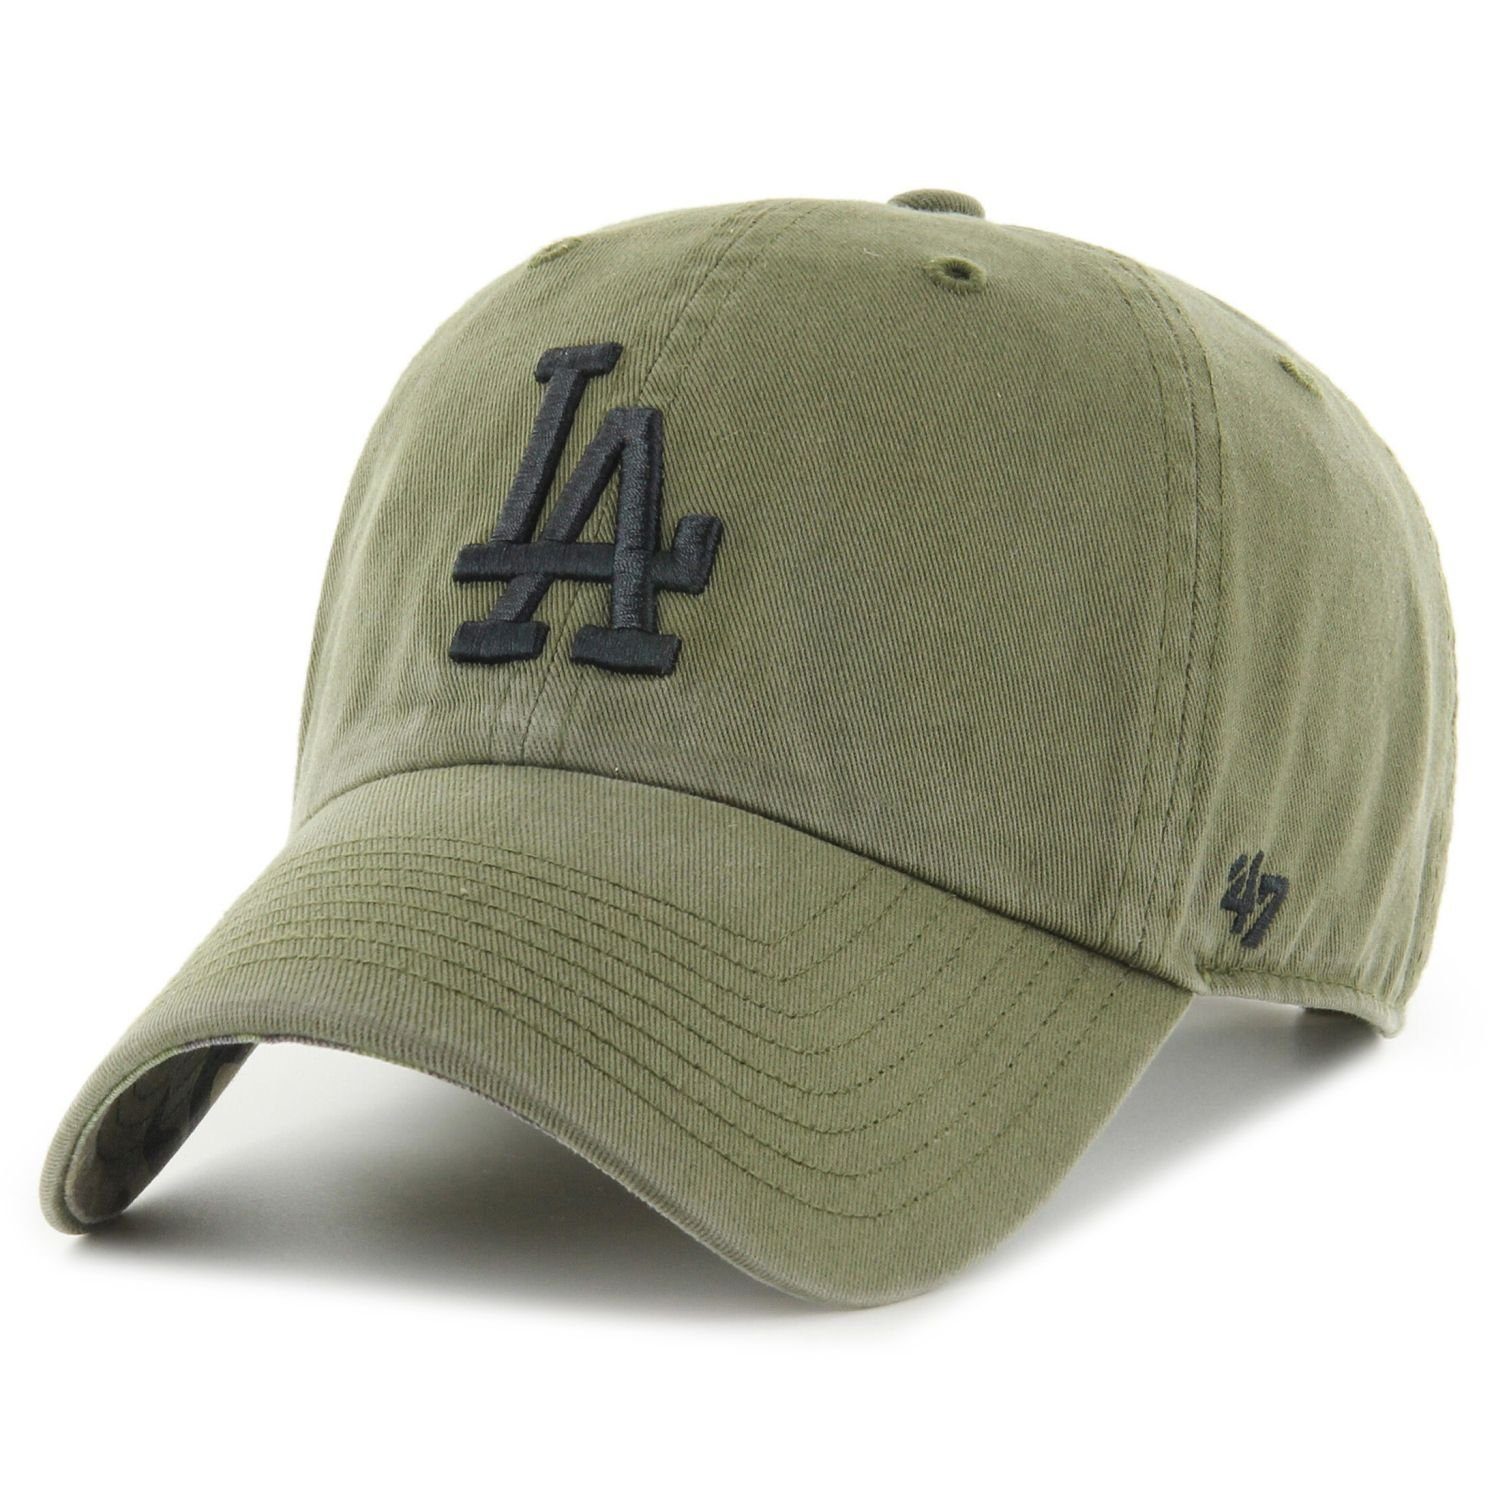 '47 Brand Trucker Cap Relaxed Fit CLEAN UP Los Angeles Dodgers sandal